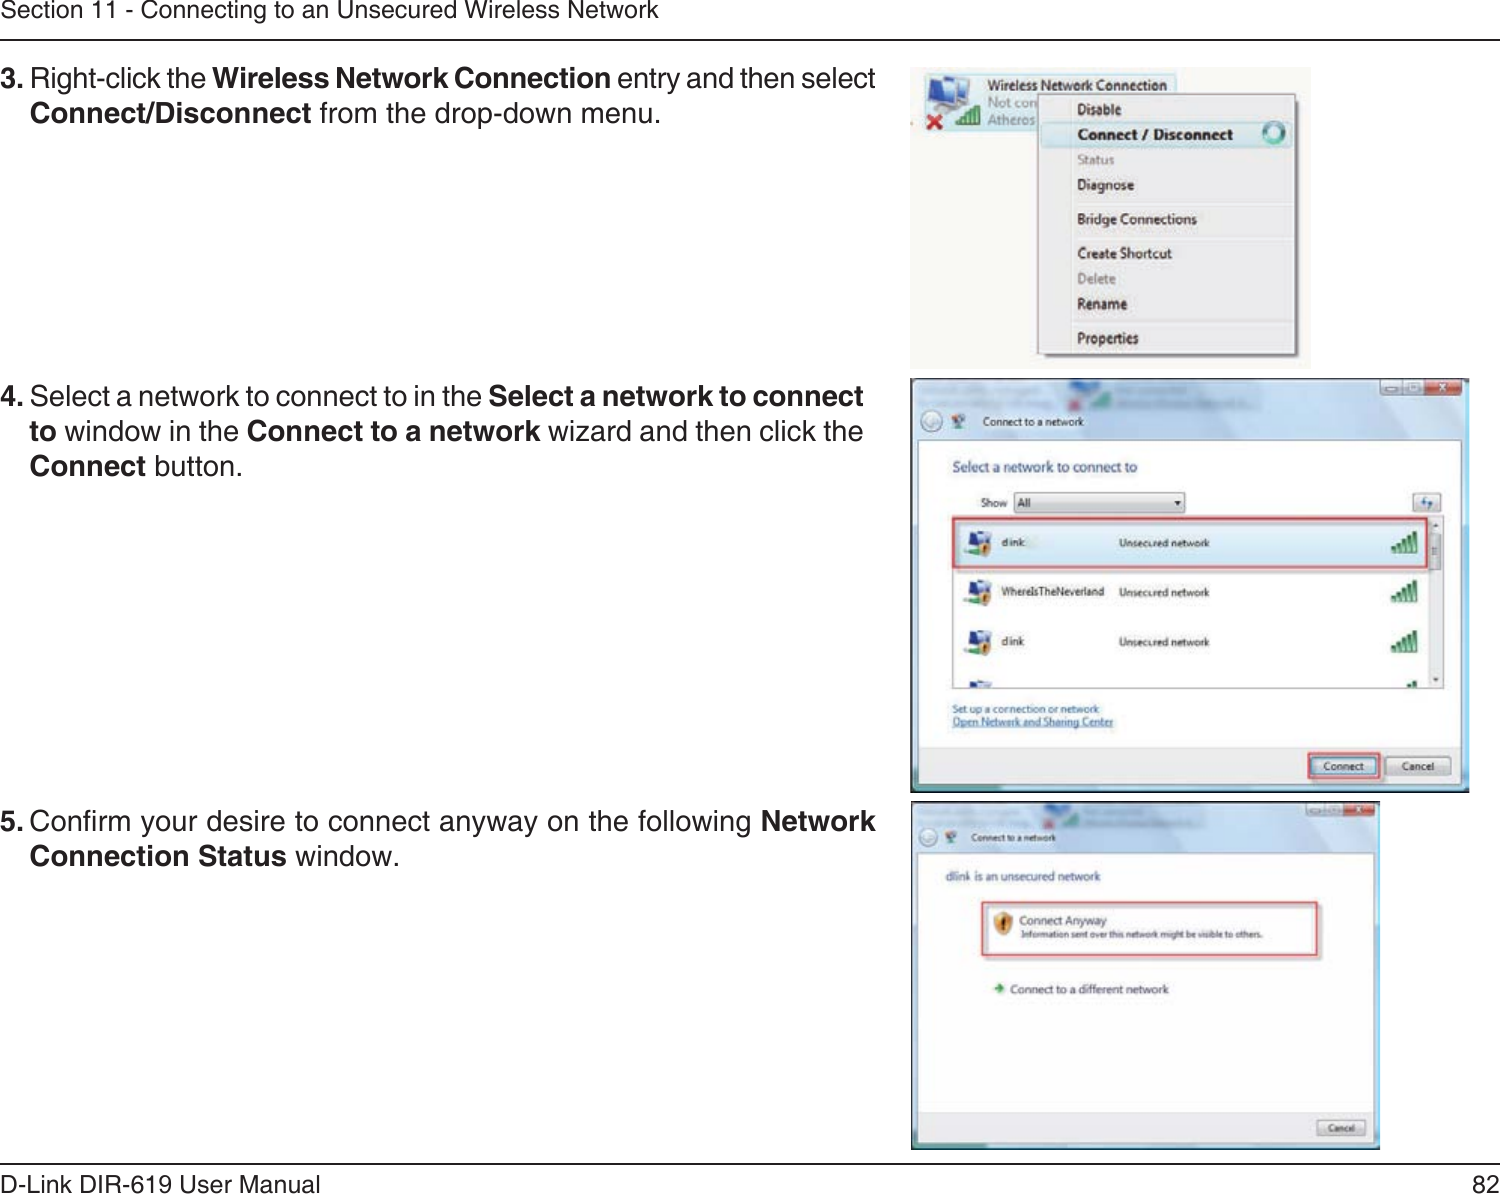 82D-Link DIR-619 User ManualSection 11 - Connecting to an Unsecured Wireless Network3. Right-click the Wireless Network Connection entry and then selectConnect/Disconnect from the drop-down menu. 4. Select a network to connect to in the Select a network to connectto window in the Connect to a network wizard and then click theConnect button. 5. Conrm your desire to connect anyway on the following Network Connection Status window.  